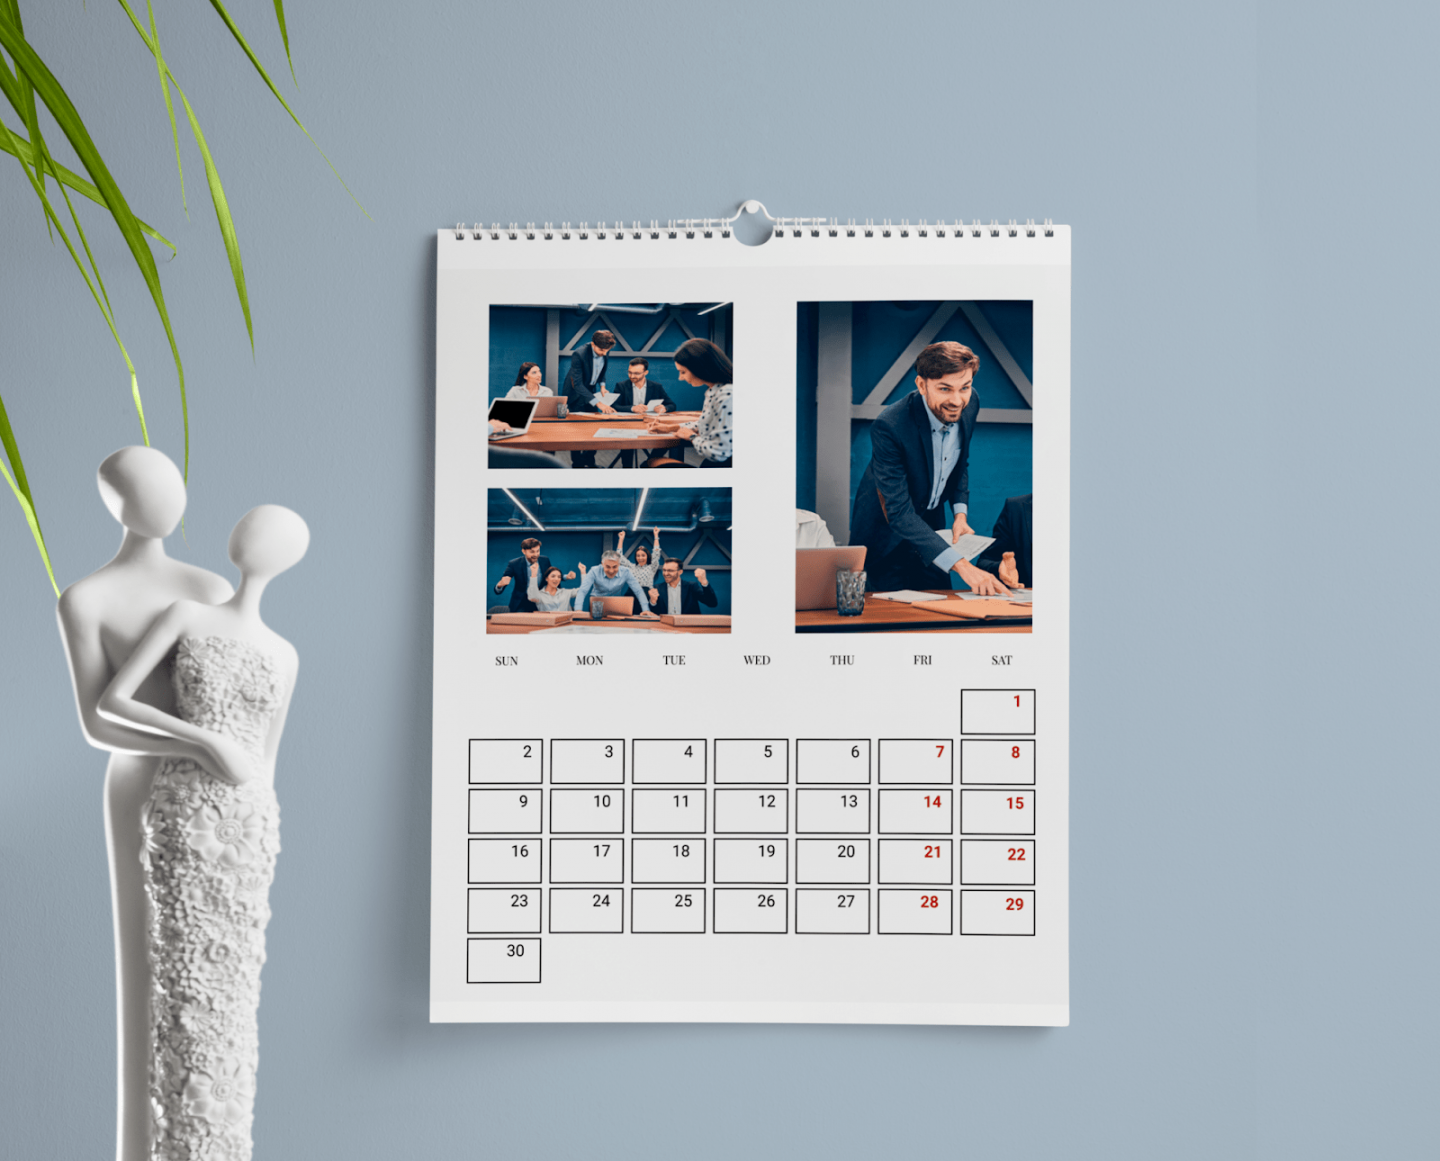 Pro-level calendar creation software: rich tools & easy workflow